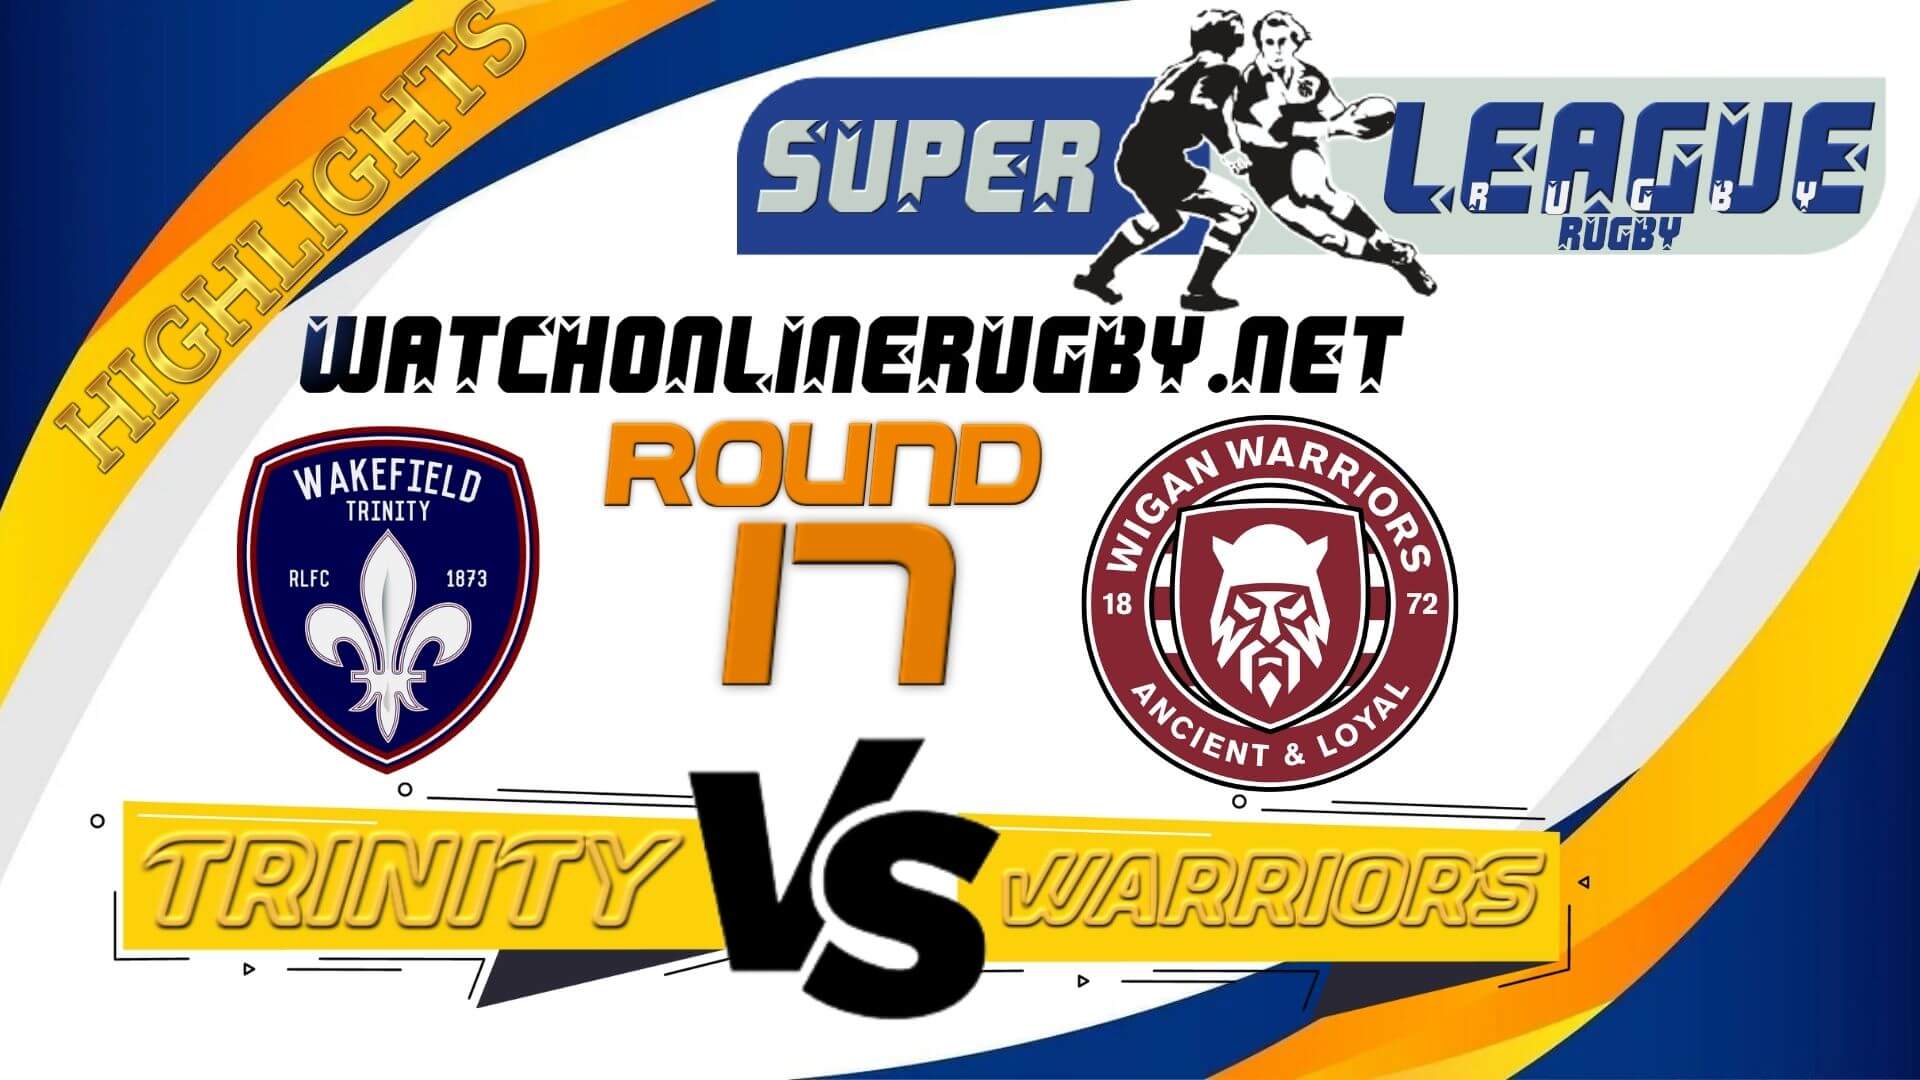 Wakefield Trinity Vs Wigan Warriors Super League Rugby 2022 RD 17